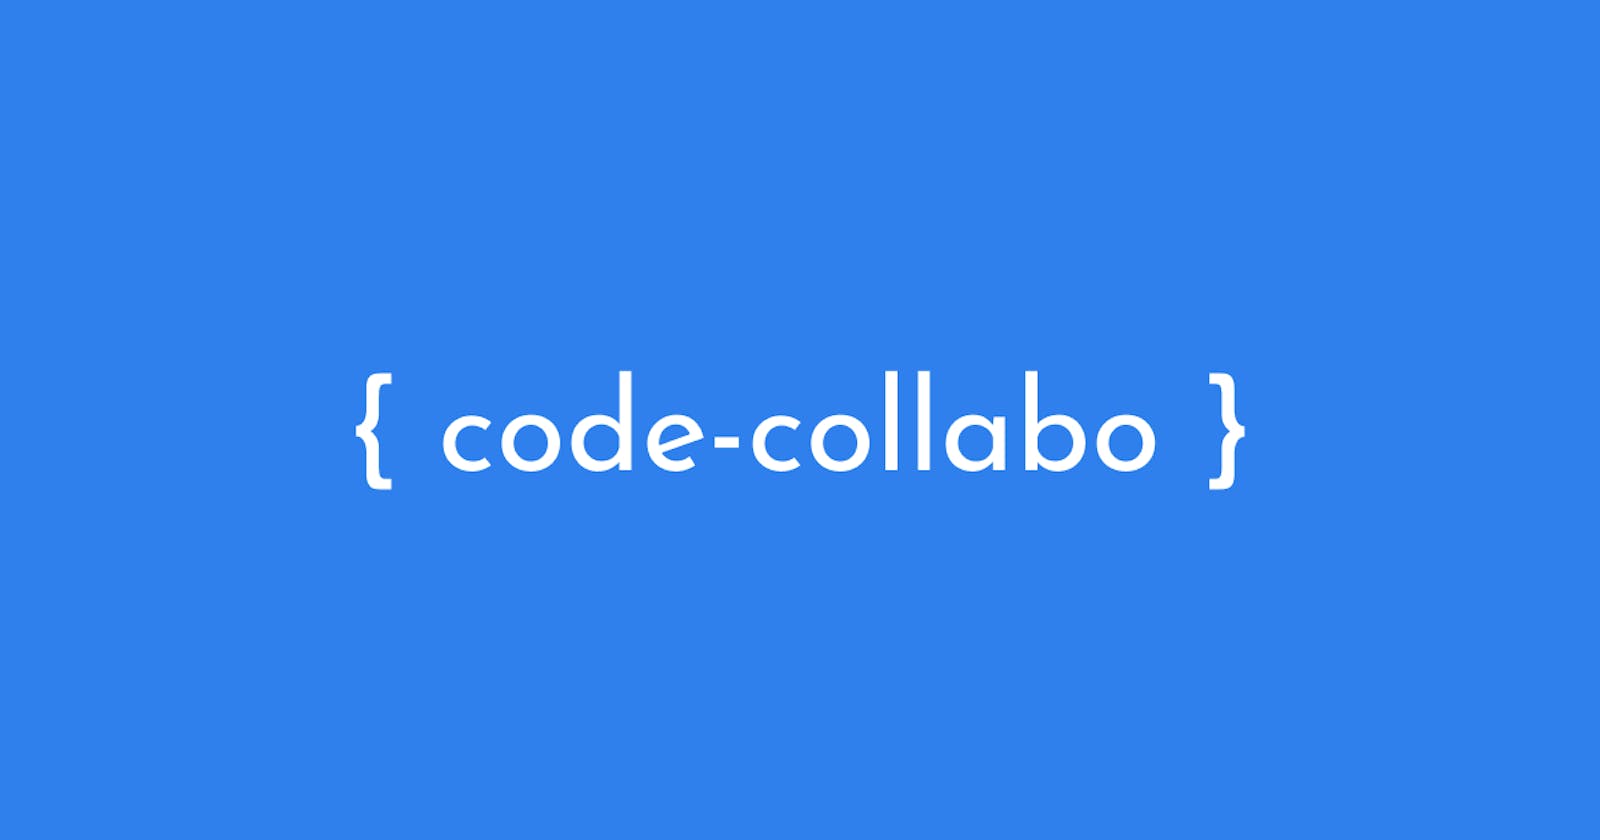 What is Code Collabo and who is it for?